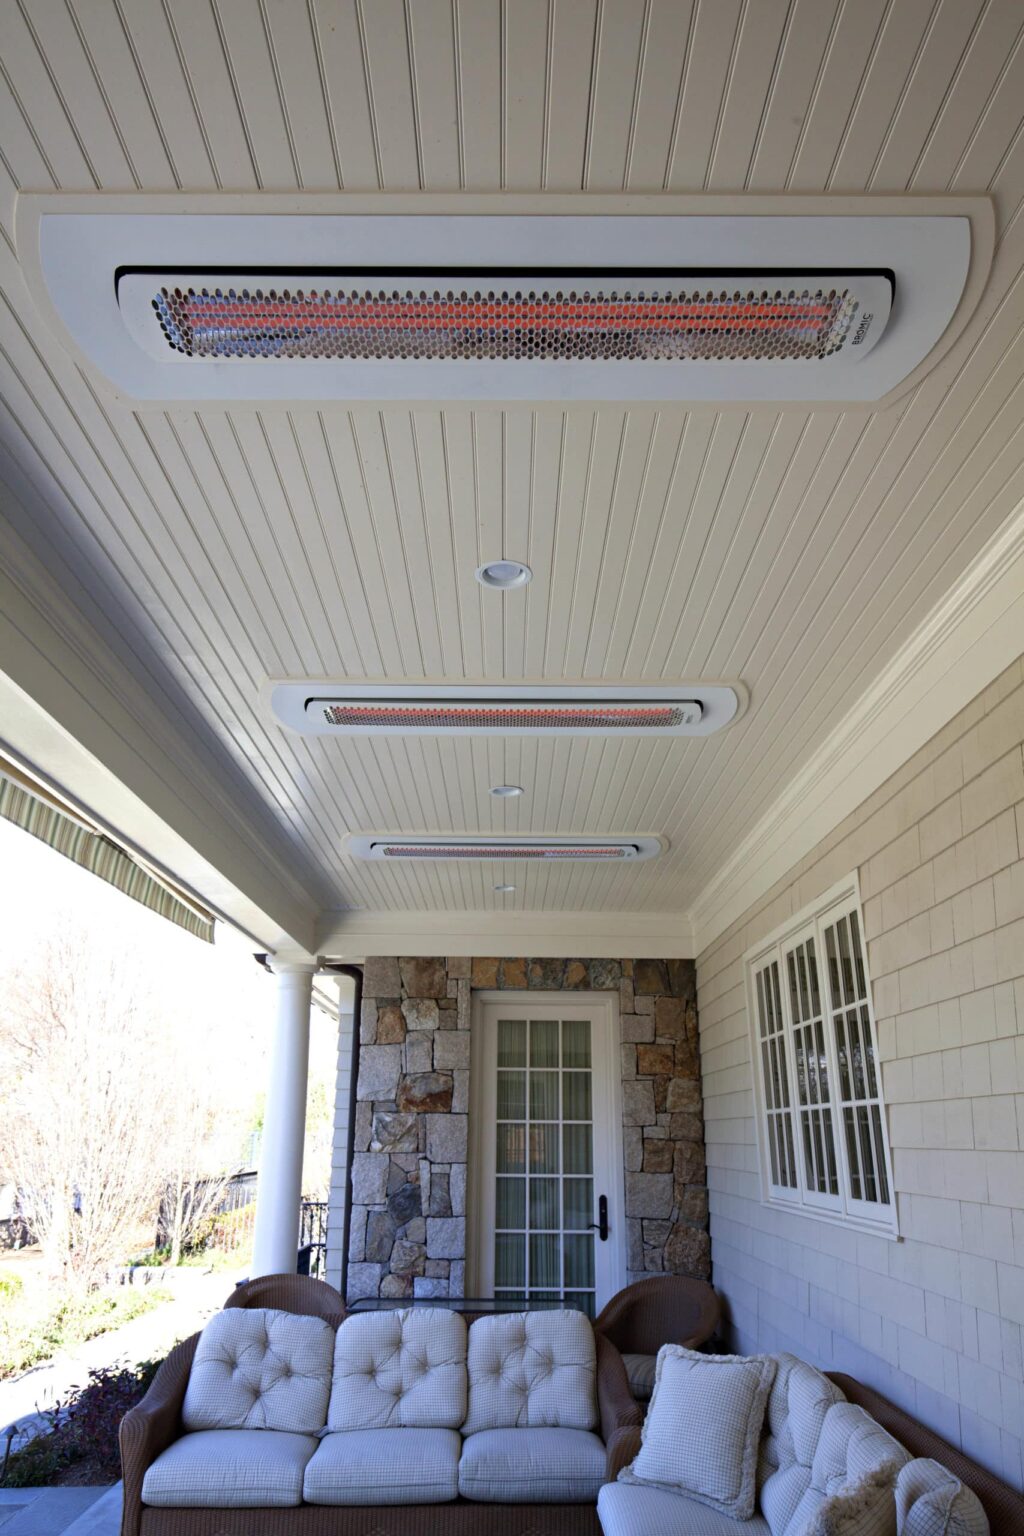 Overhead Electric Heater - Tungsten Electric in White Recessed into Ceiling on Porch